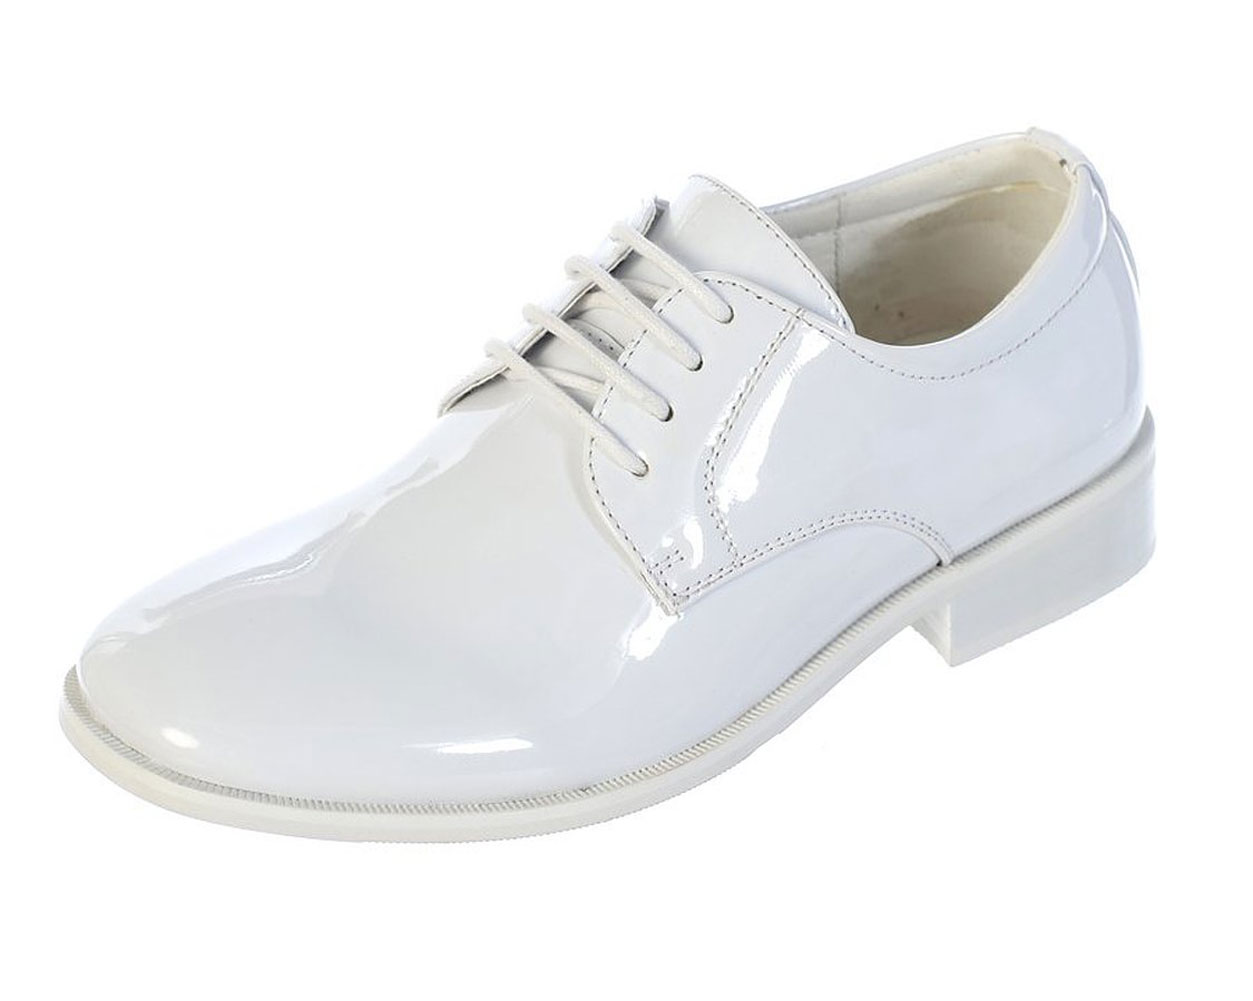 Avery Hill Boys Shiny or Shiny Patent Leather Shoes Wh Shiny Toddler 7